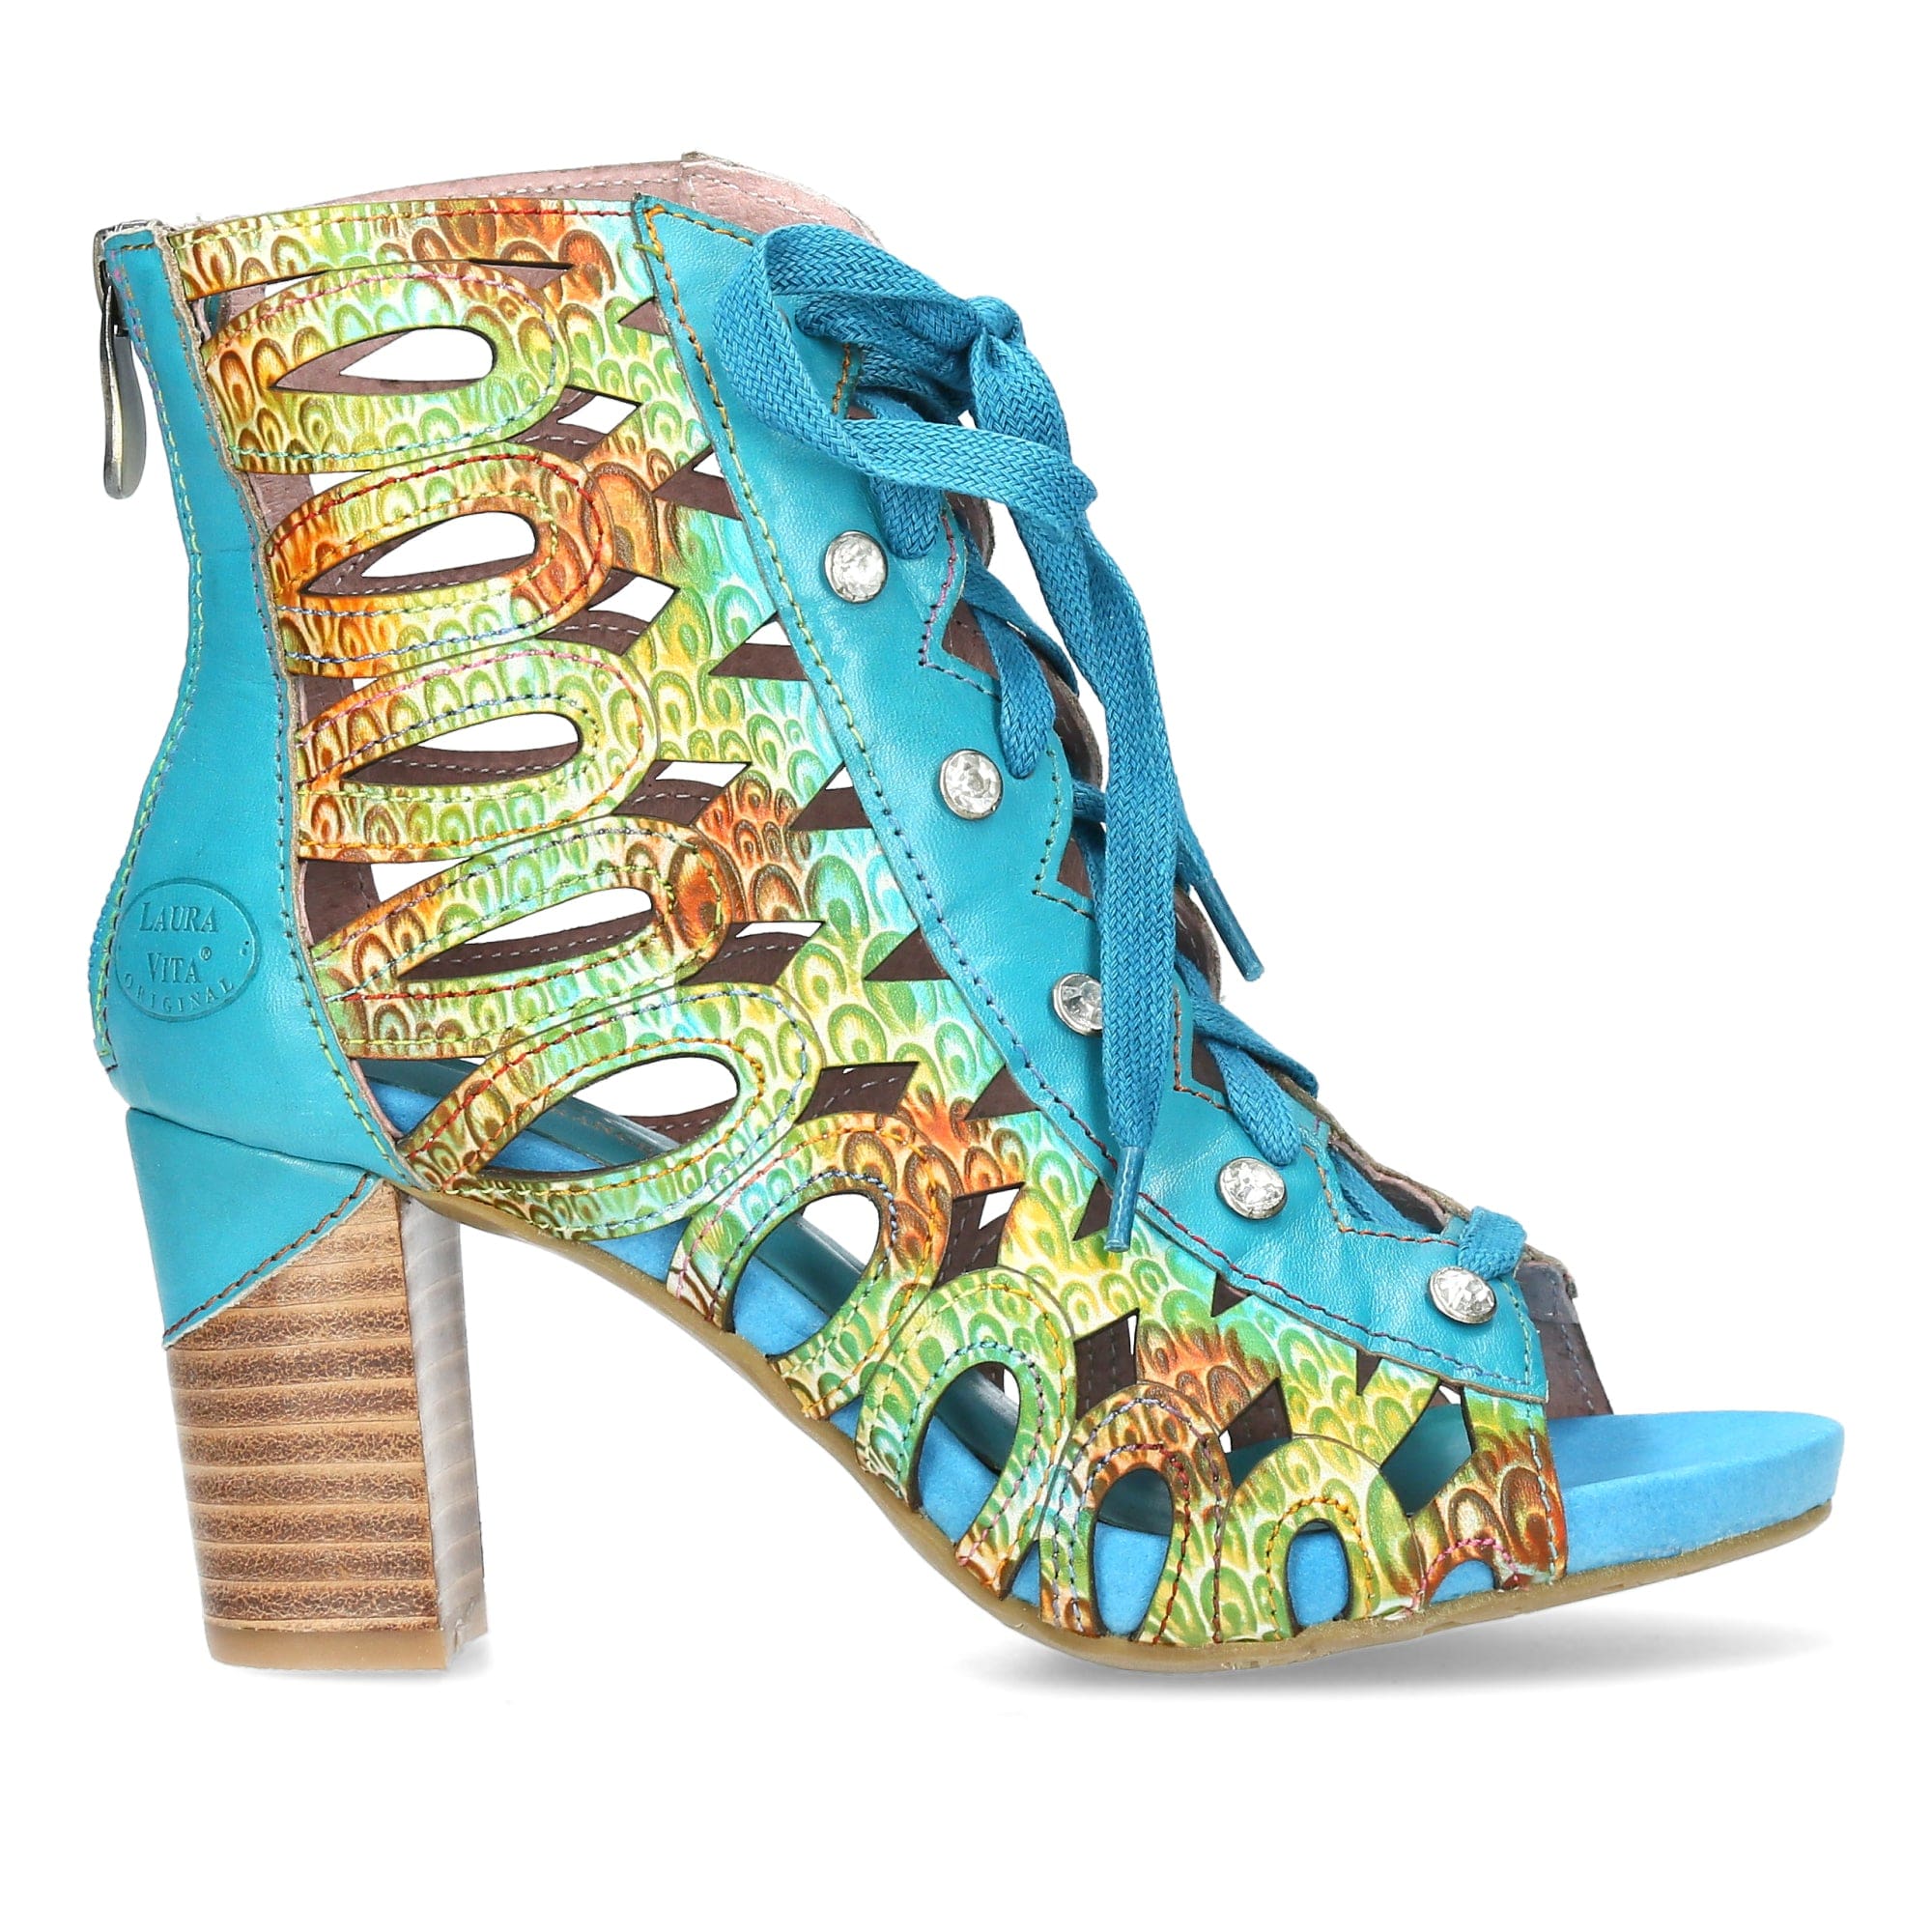 Chaussures BECRNIEO 73 - 35 / Turquoise - Sandale